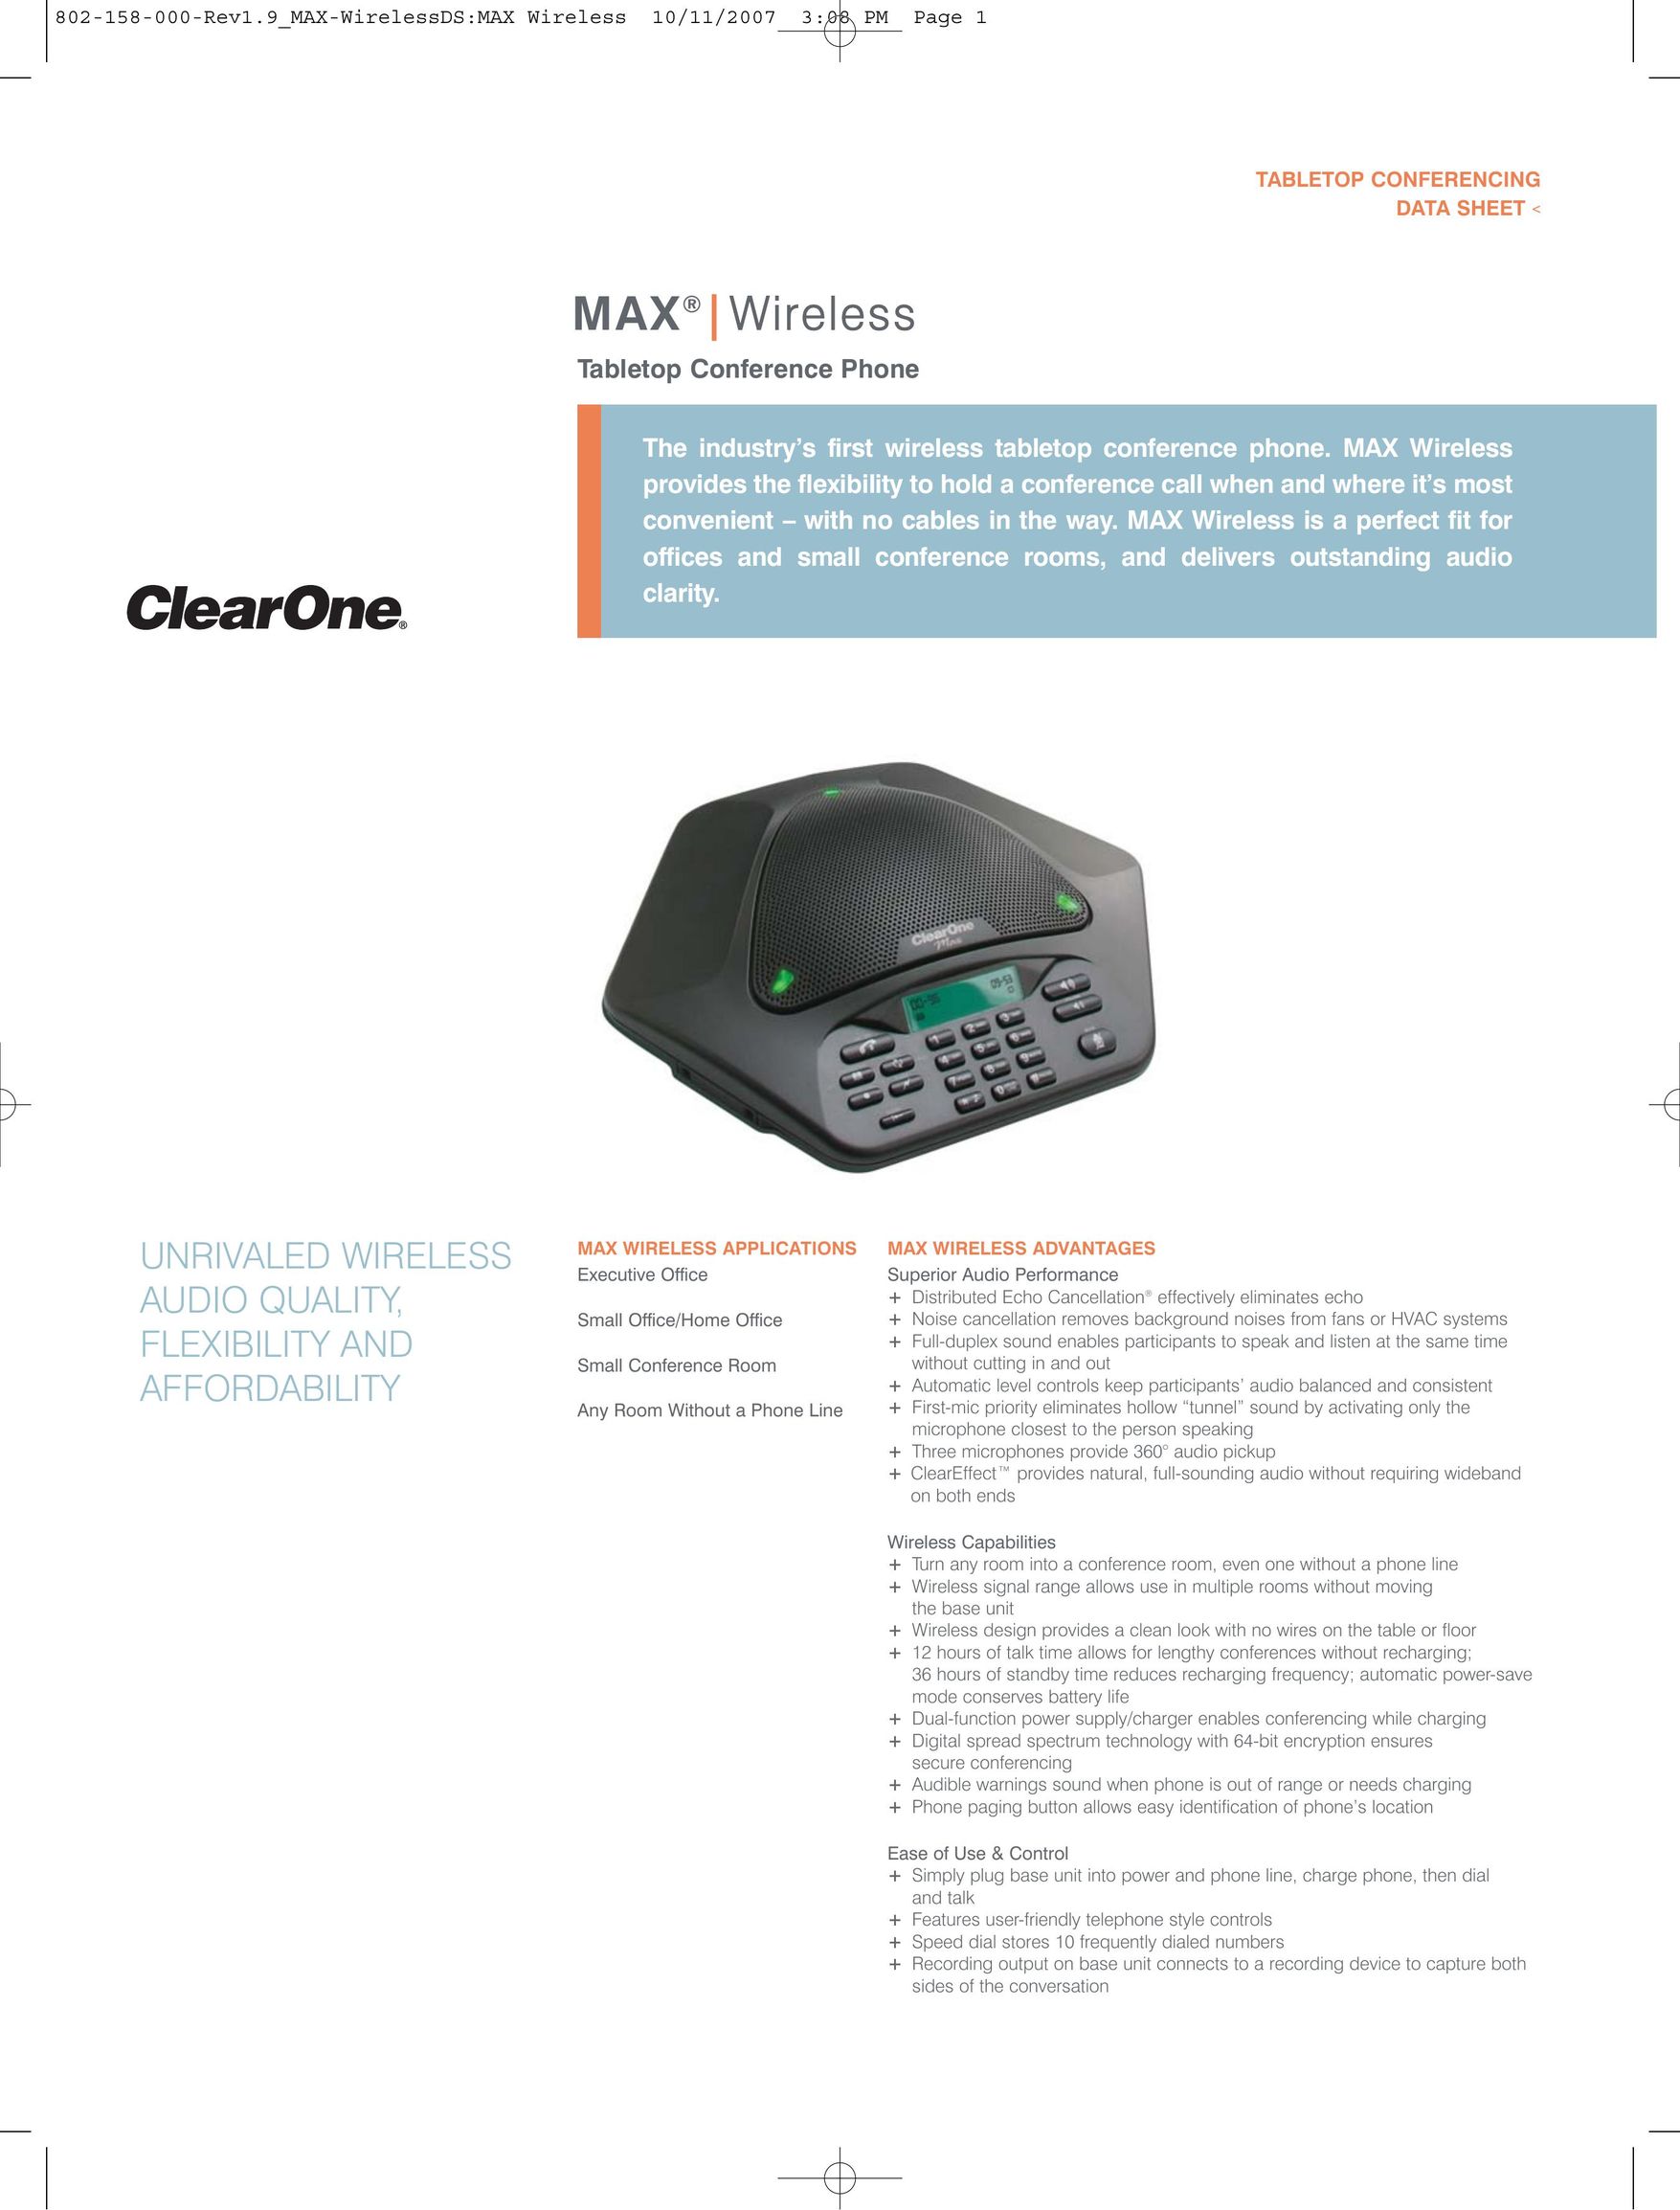 ClearOne comm 910-158-009 Conference Phone User Manual